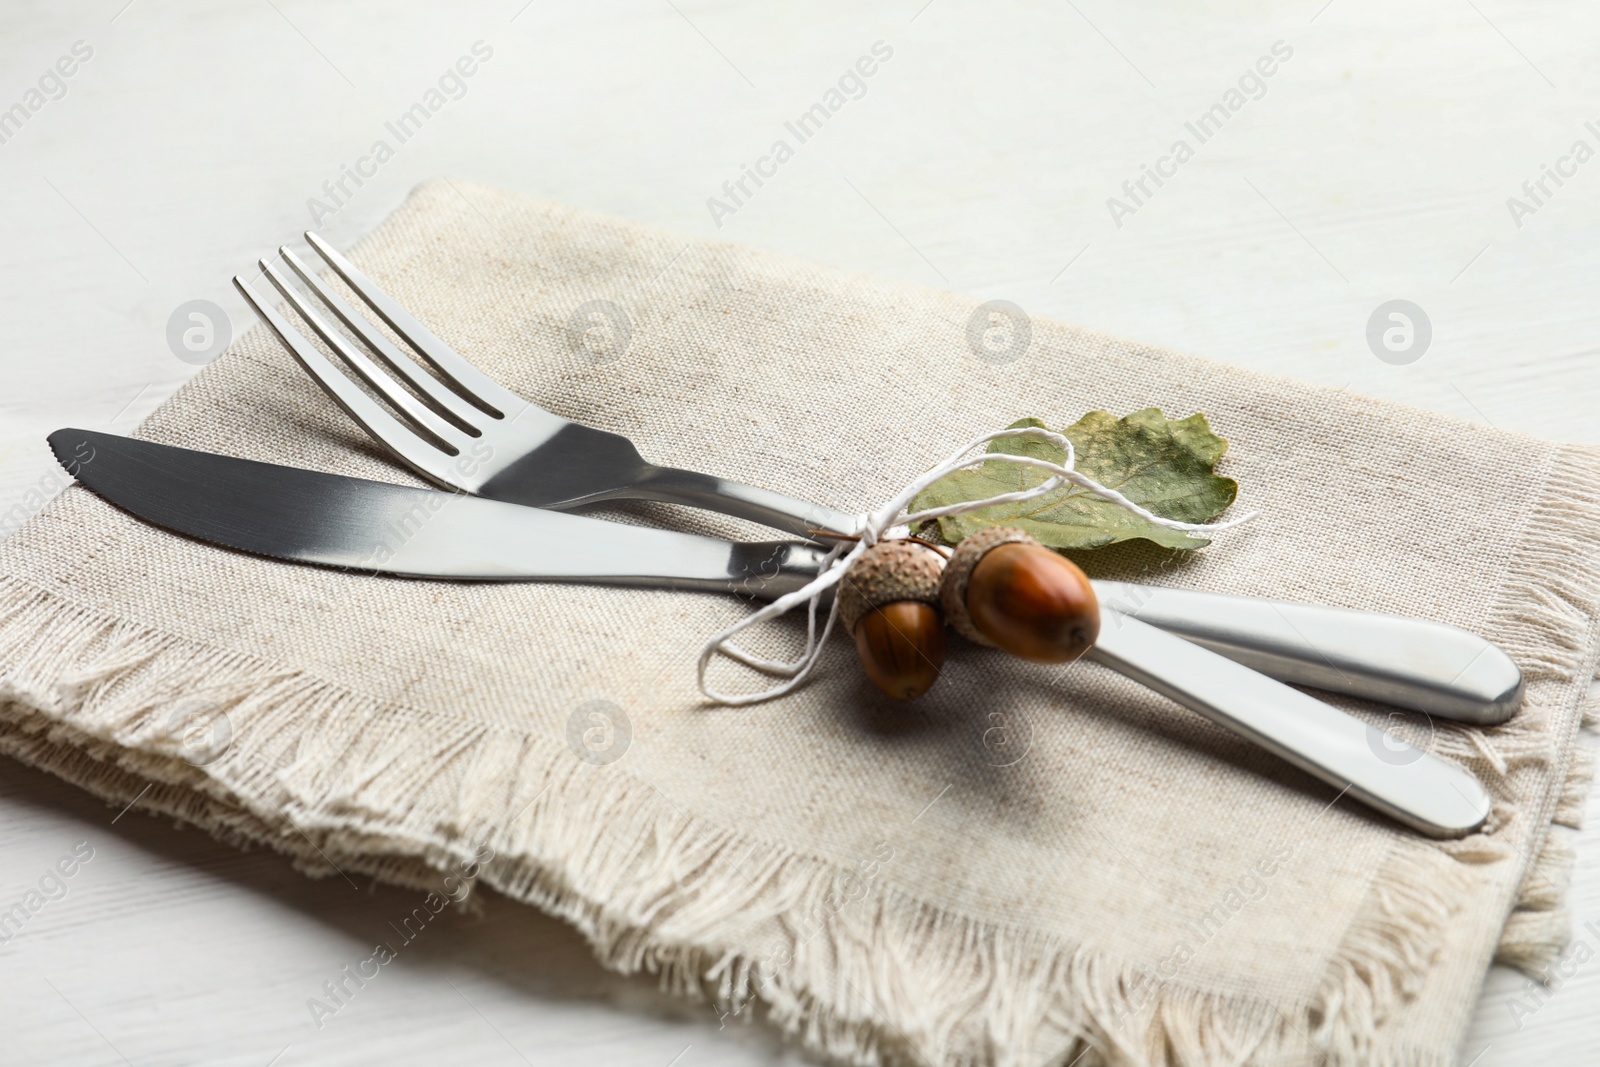 Photo of Cutlery with napkin, acorns and napkin on white wooden background, closeup. Table setting elements